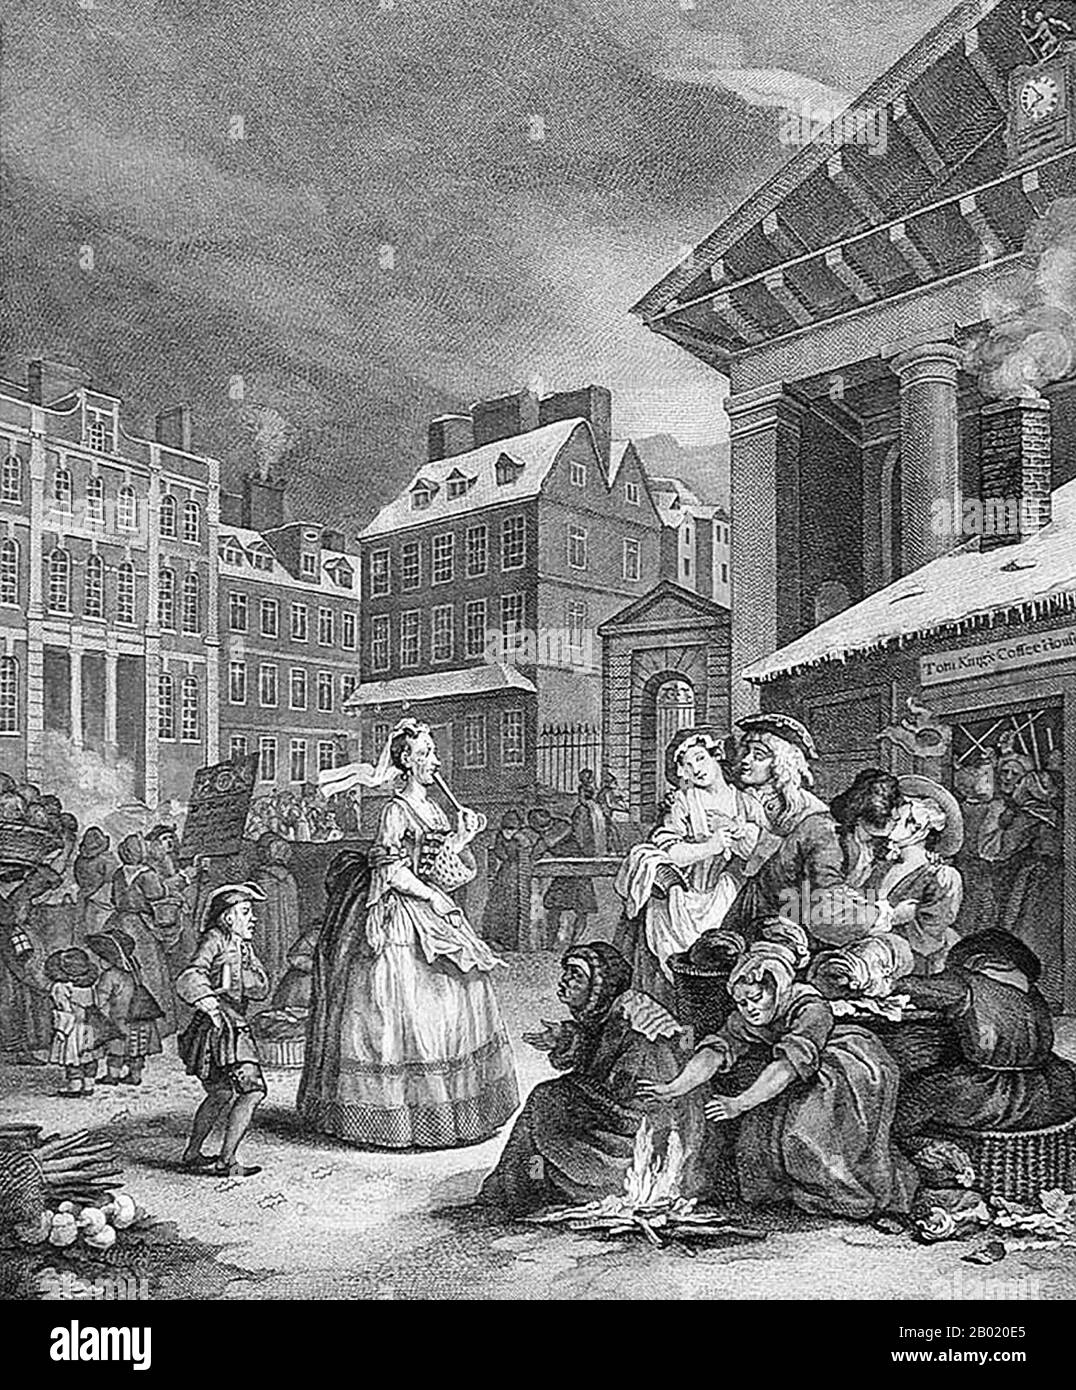 Historians define English coffeehouses as public social houses during the 17th and 18th centuries, in which patrons would assemble for conversation and social interaction, while taking part in the newly emerging coffee consumption habits of the time. Travellers introduced coffee as a beverage to England during the mid-17th century.  For the price of a penny, customers purchased a cup of coffee and admission to a coffeehouse, where men engaged in conversation. Topics discussed within the coffeehouses included politics and political scandals, daily gossip, fashion, current events, and debates su Stock Photo